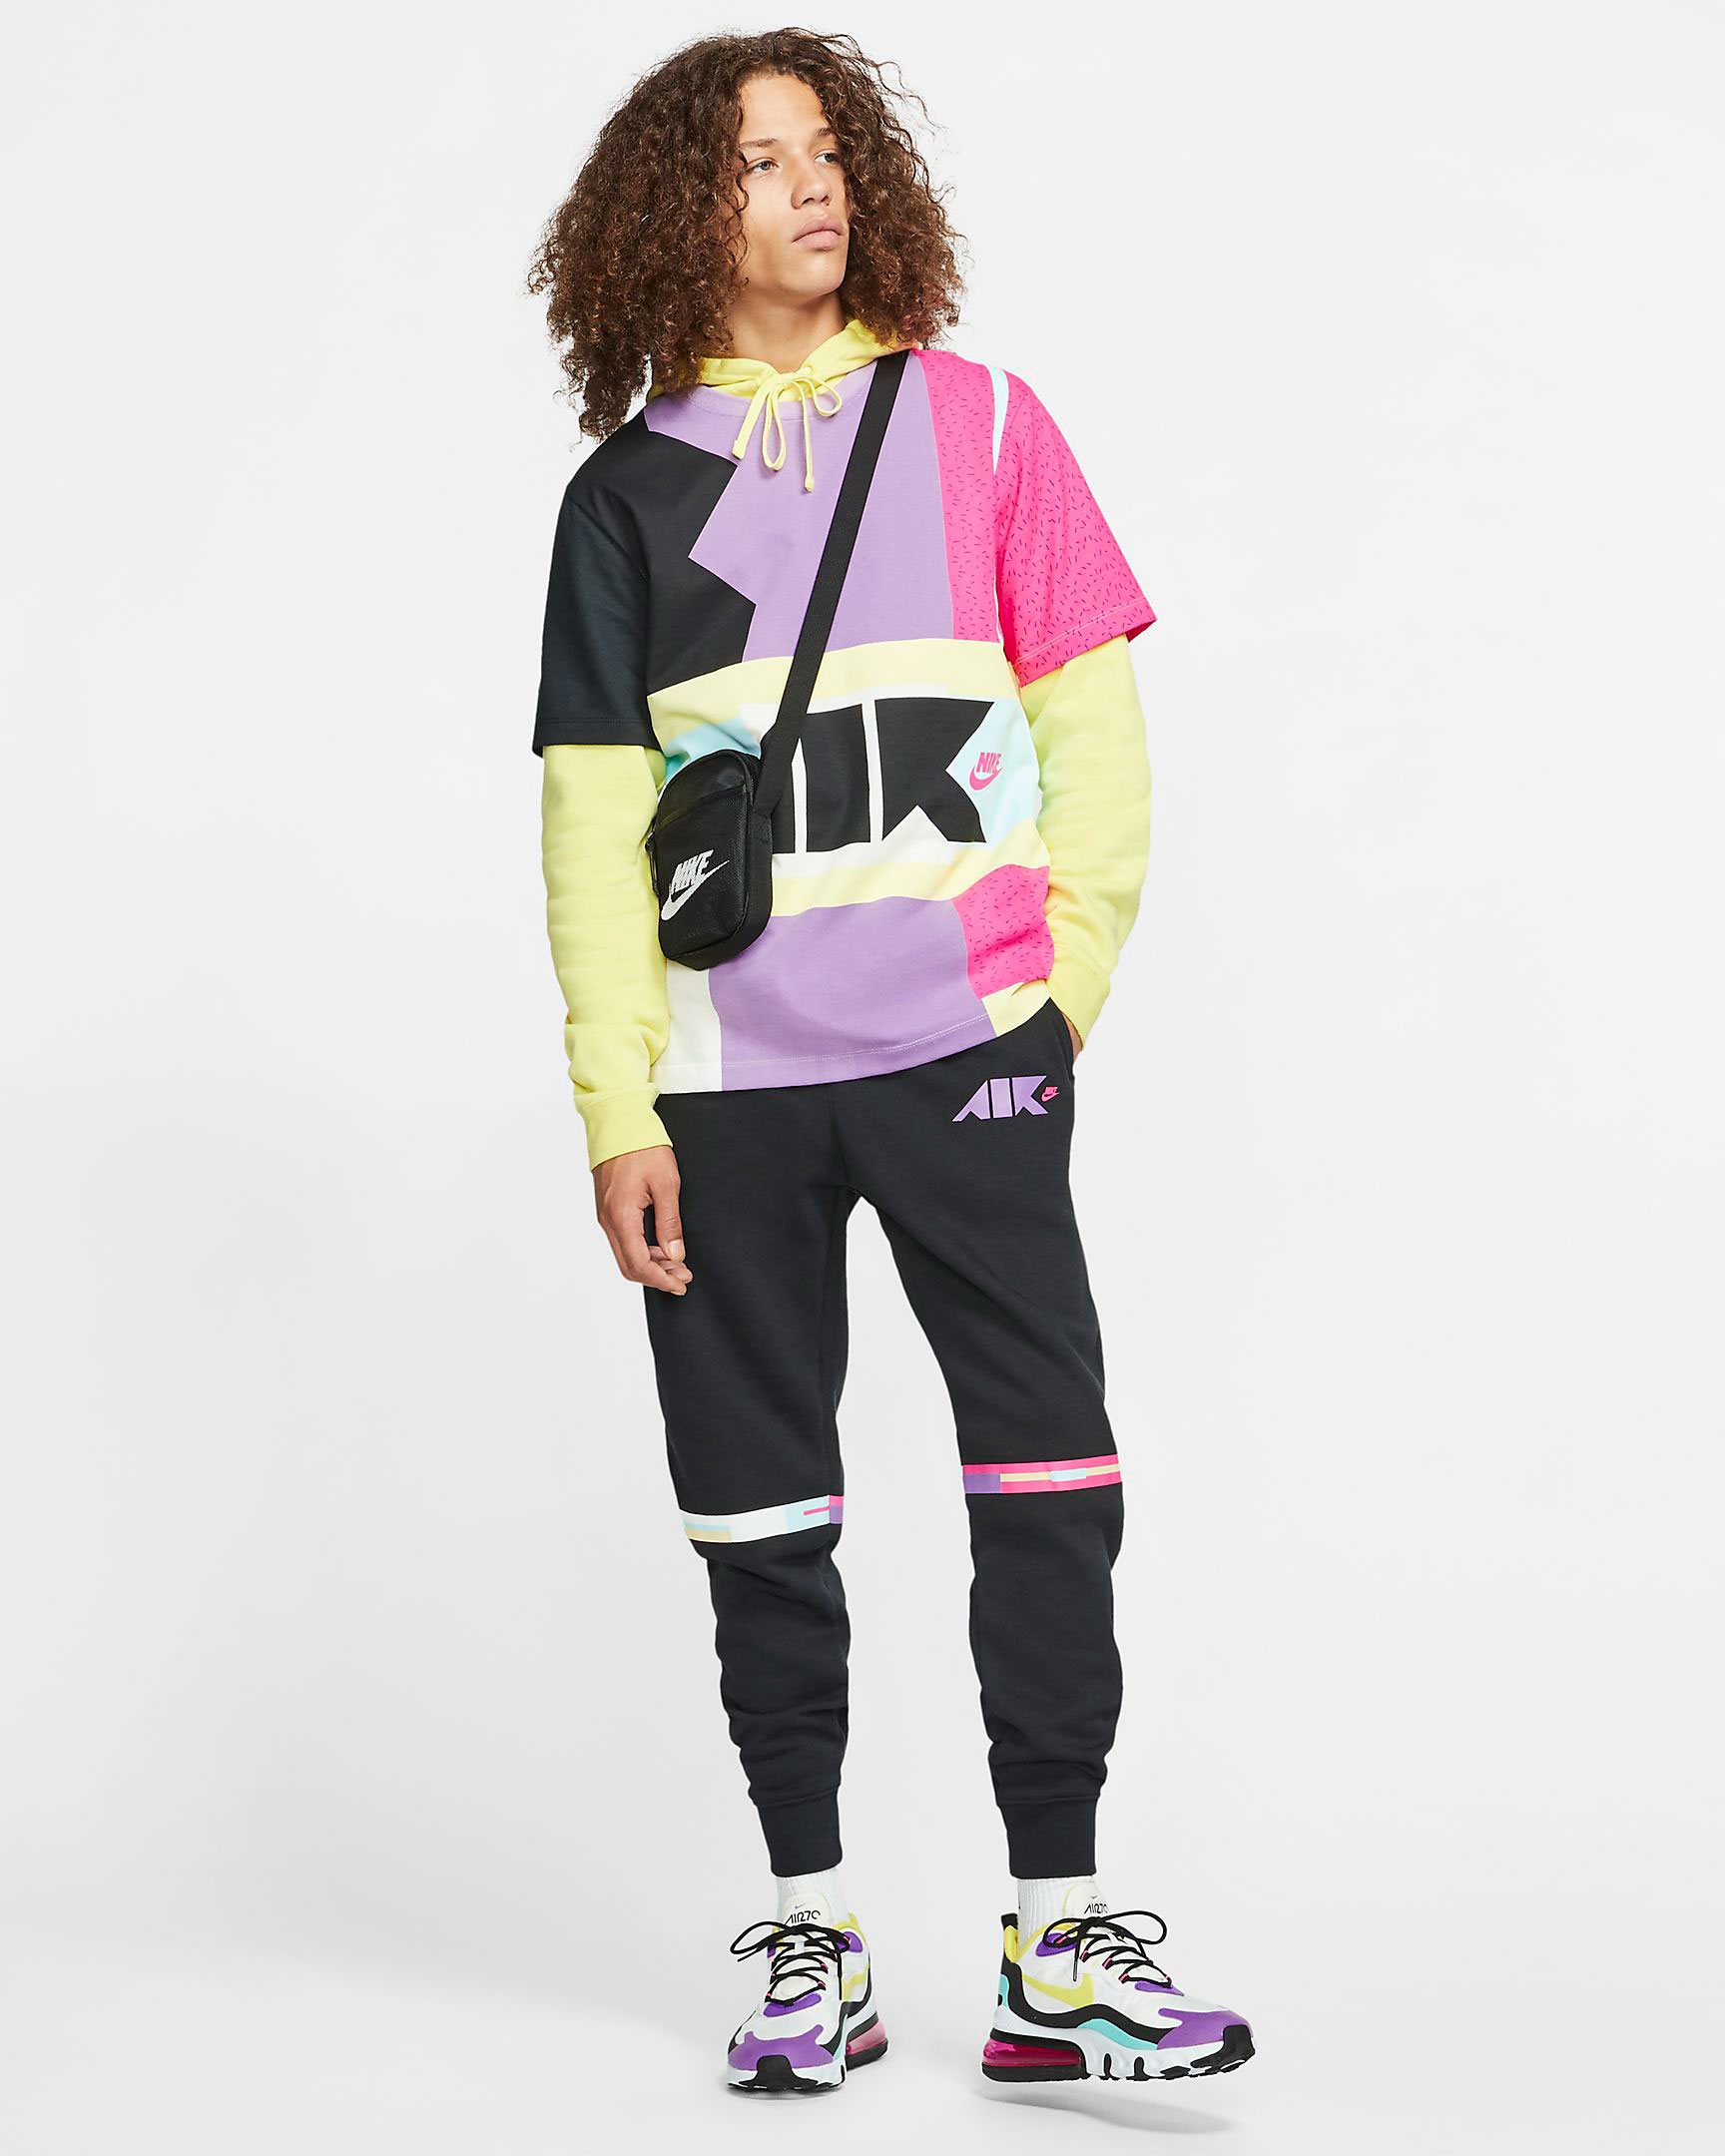 nike-geometric-clothing-sneaker-outfit